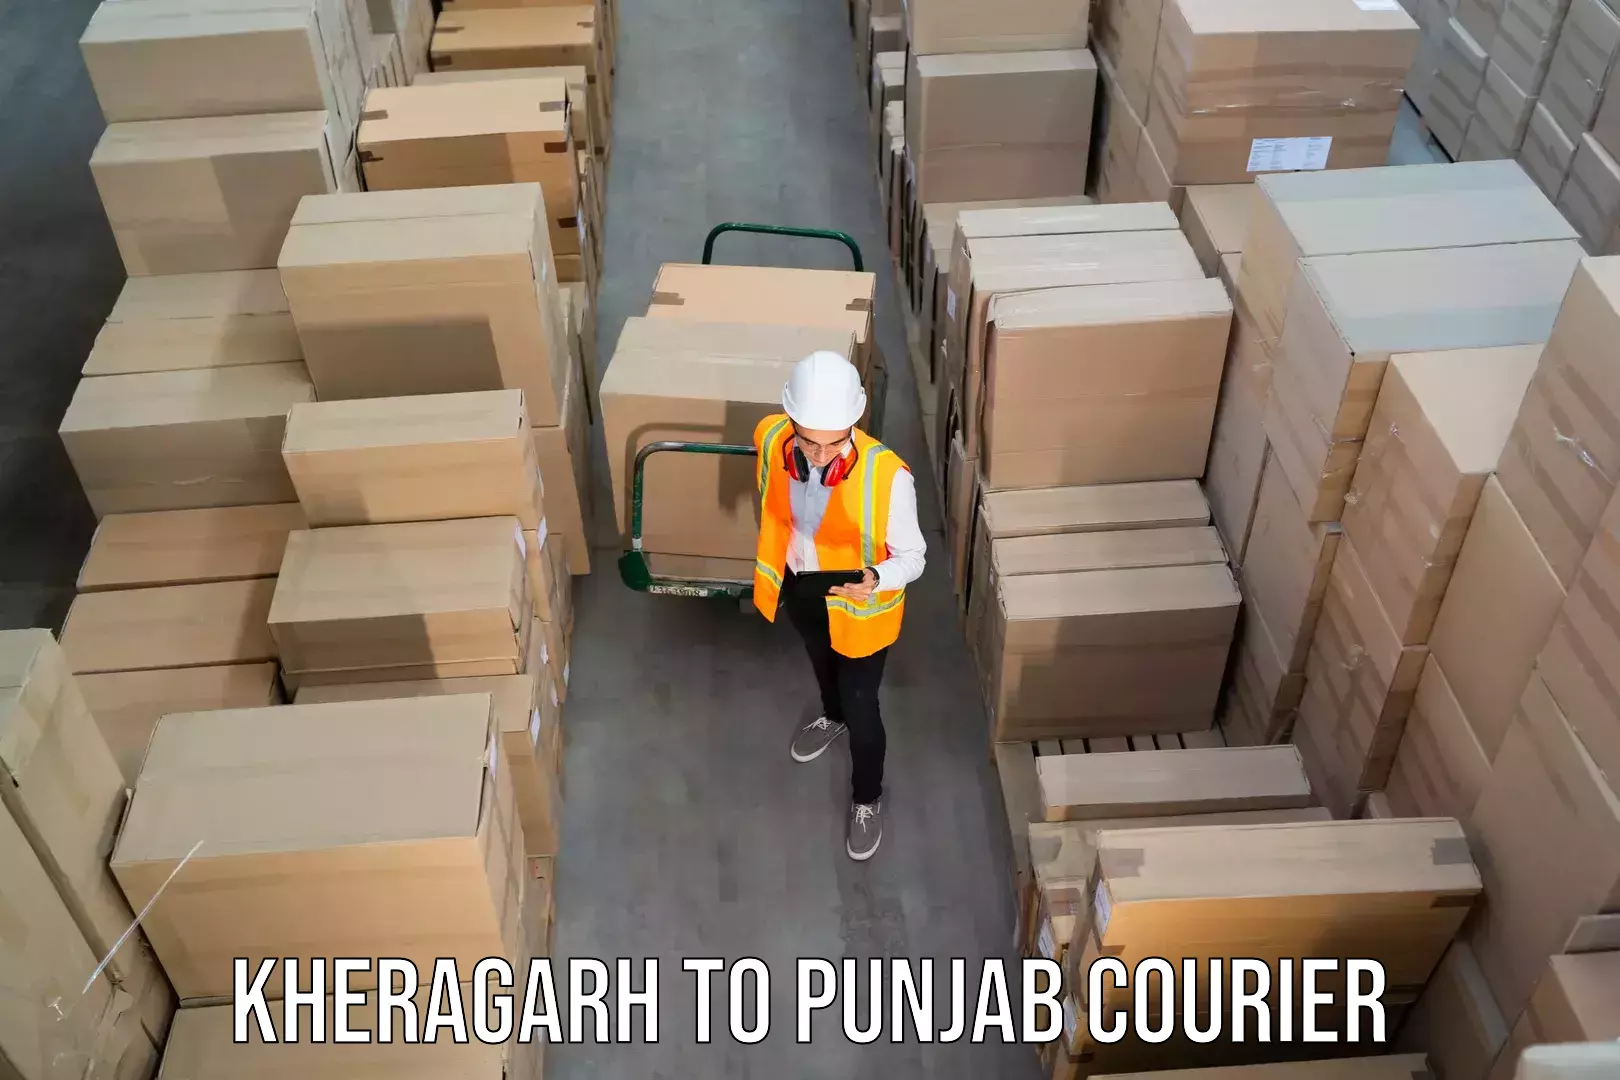 Reliable courier service in Kheragarh to Beas